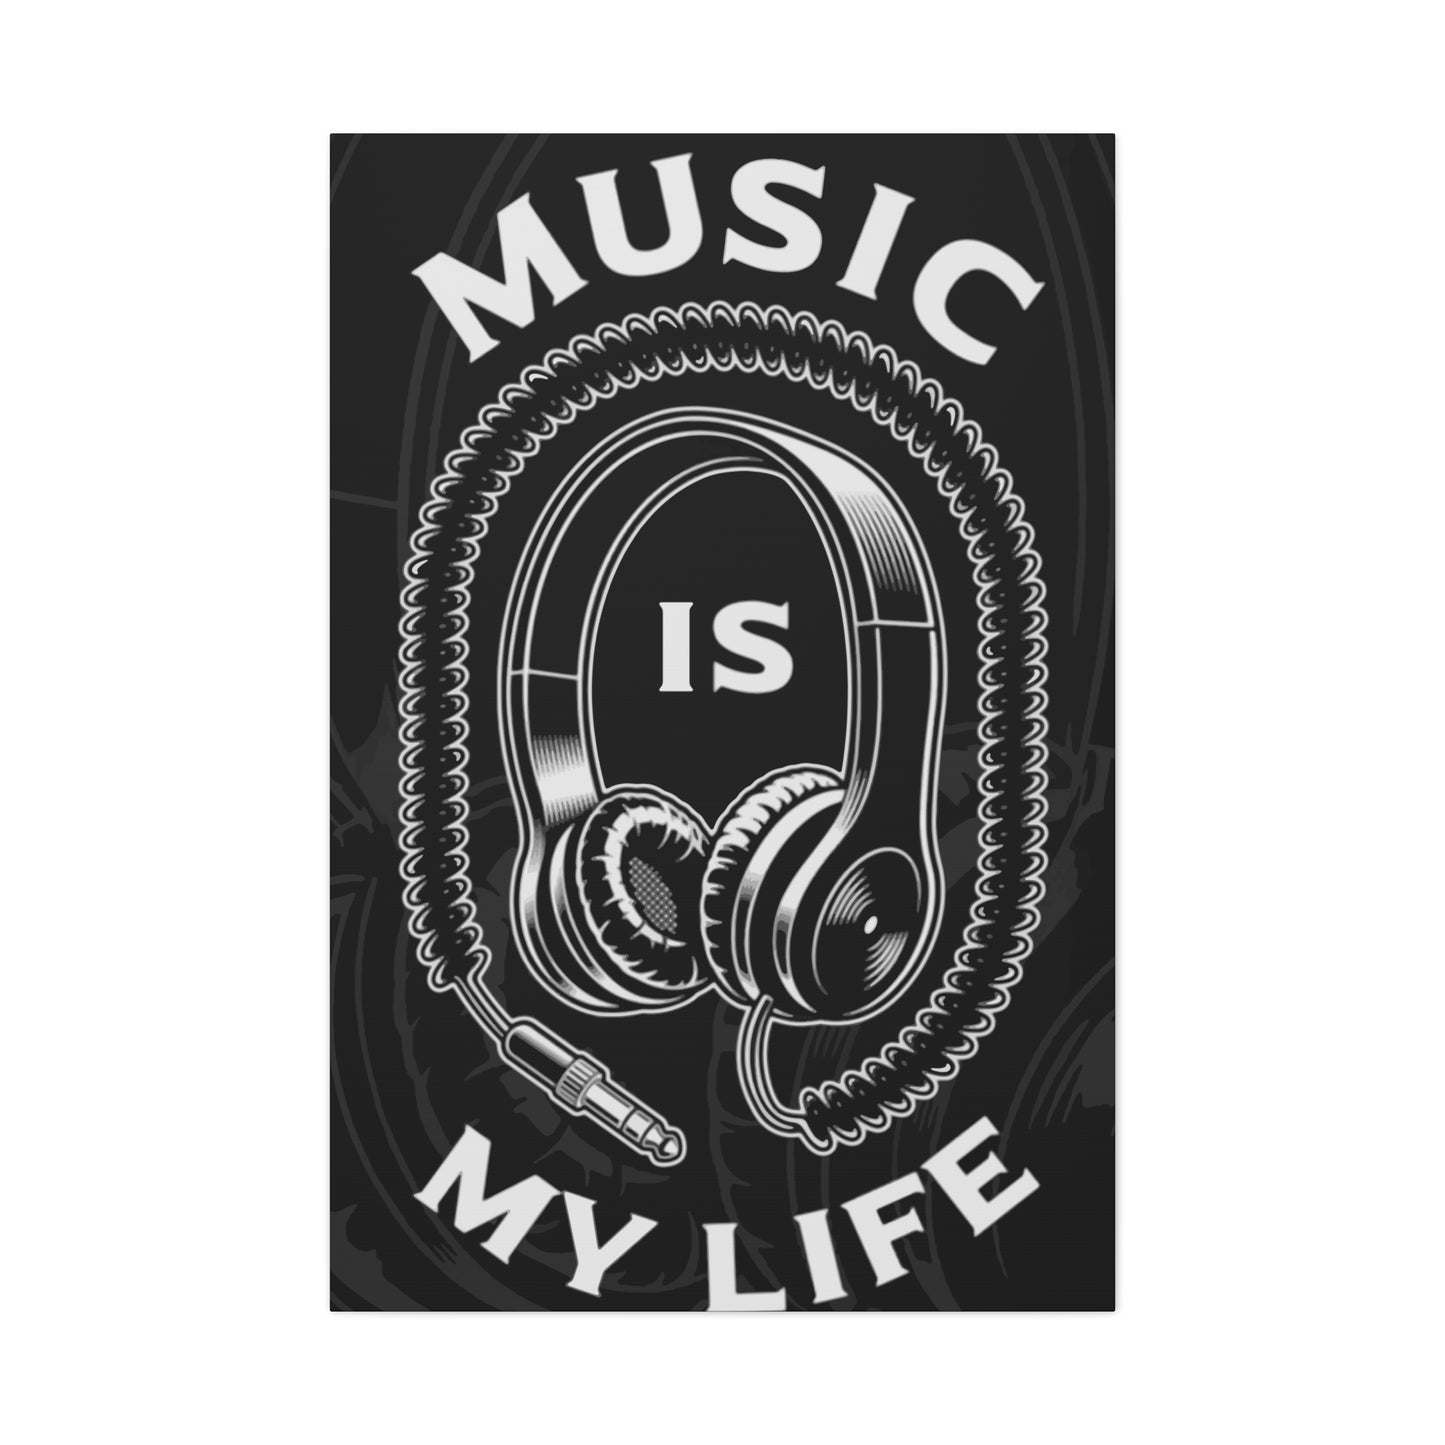 Music Quote Wall Art & Canvas Prints